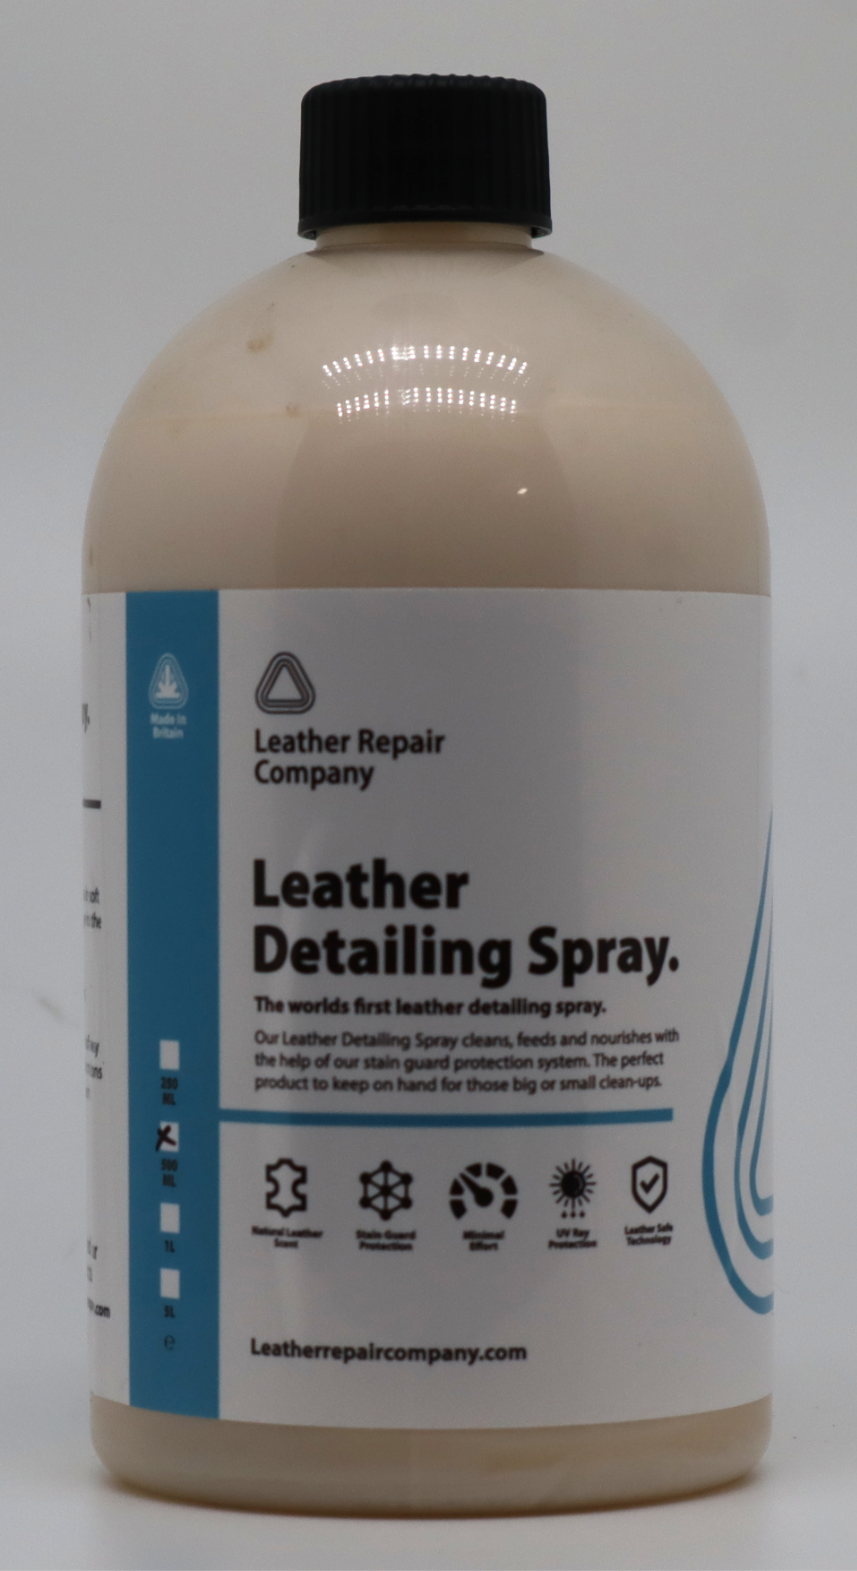 Leather Detailing Spray